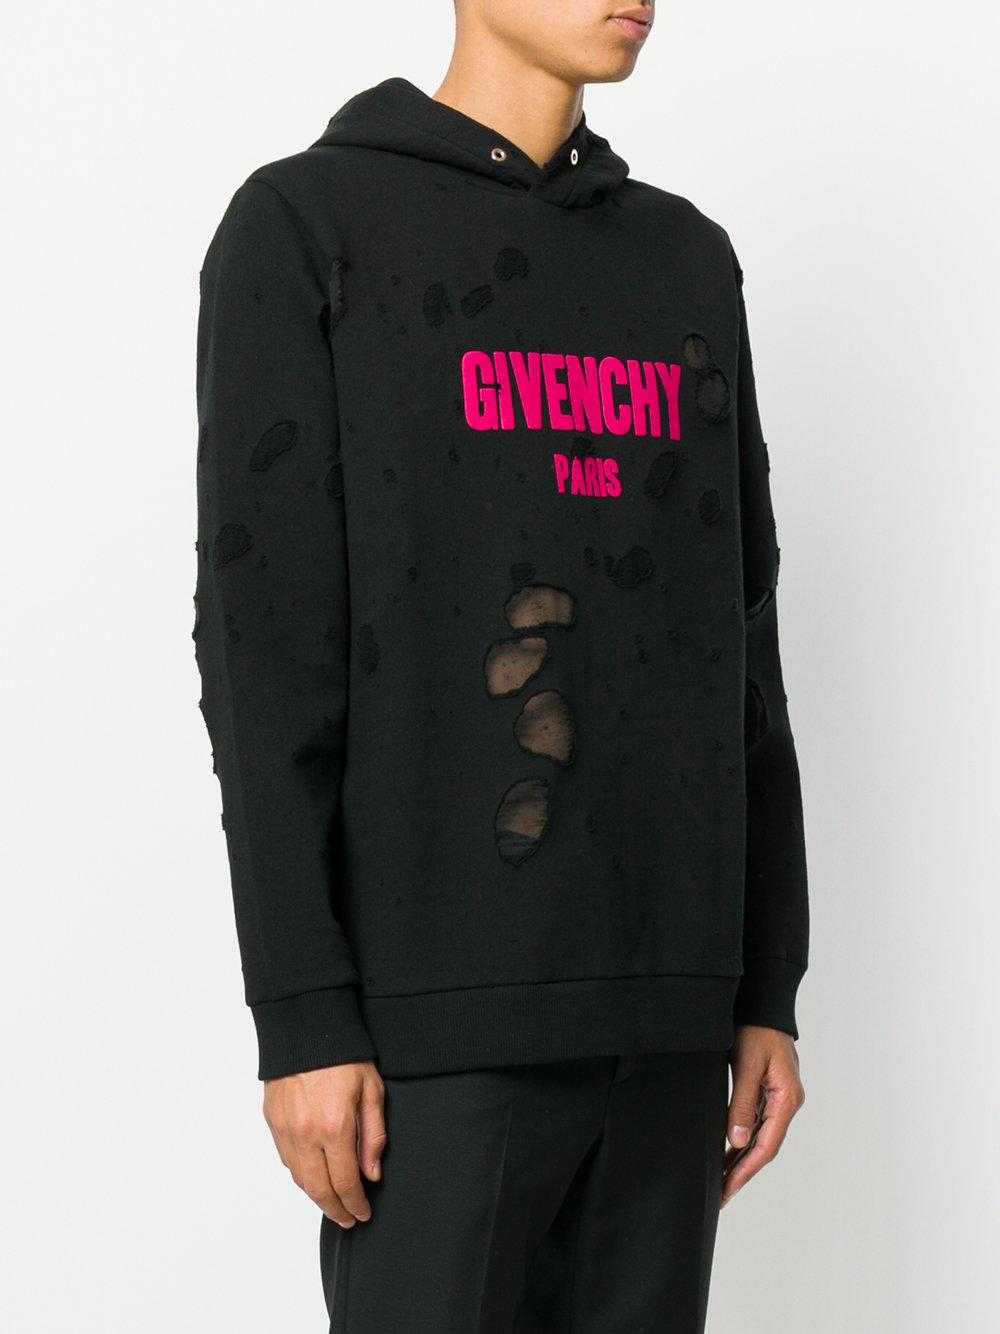 Givenchy Paris Distressed Hoodie in Black for Men | Lyst